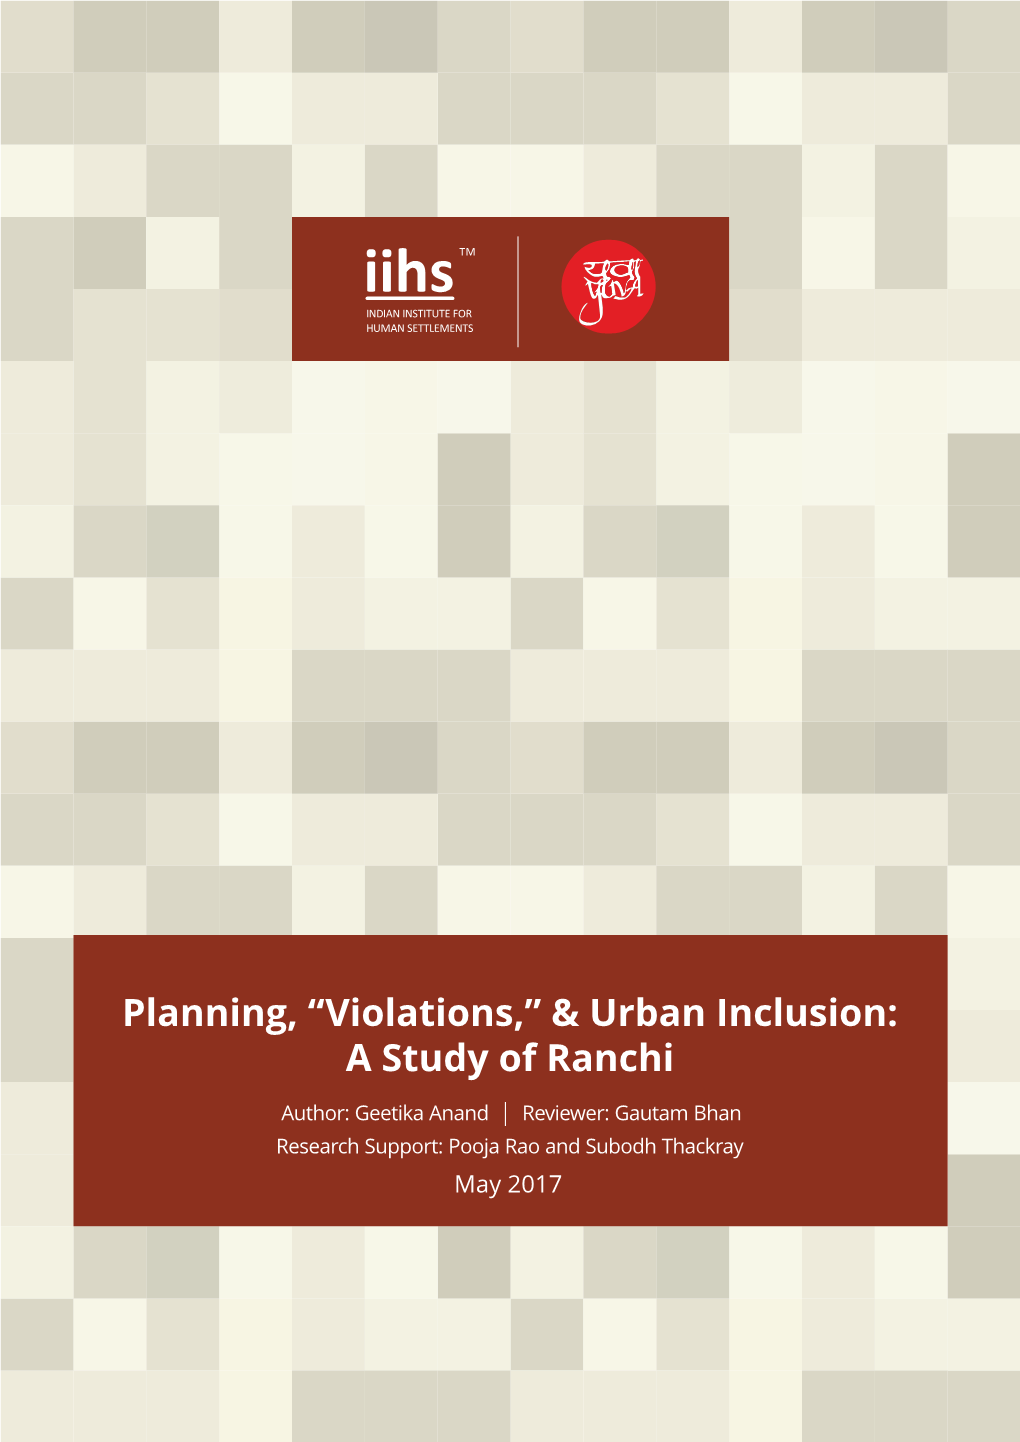 Planning, “Violations,” & Urban Inclusion: a Study of Ranchi